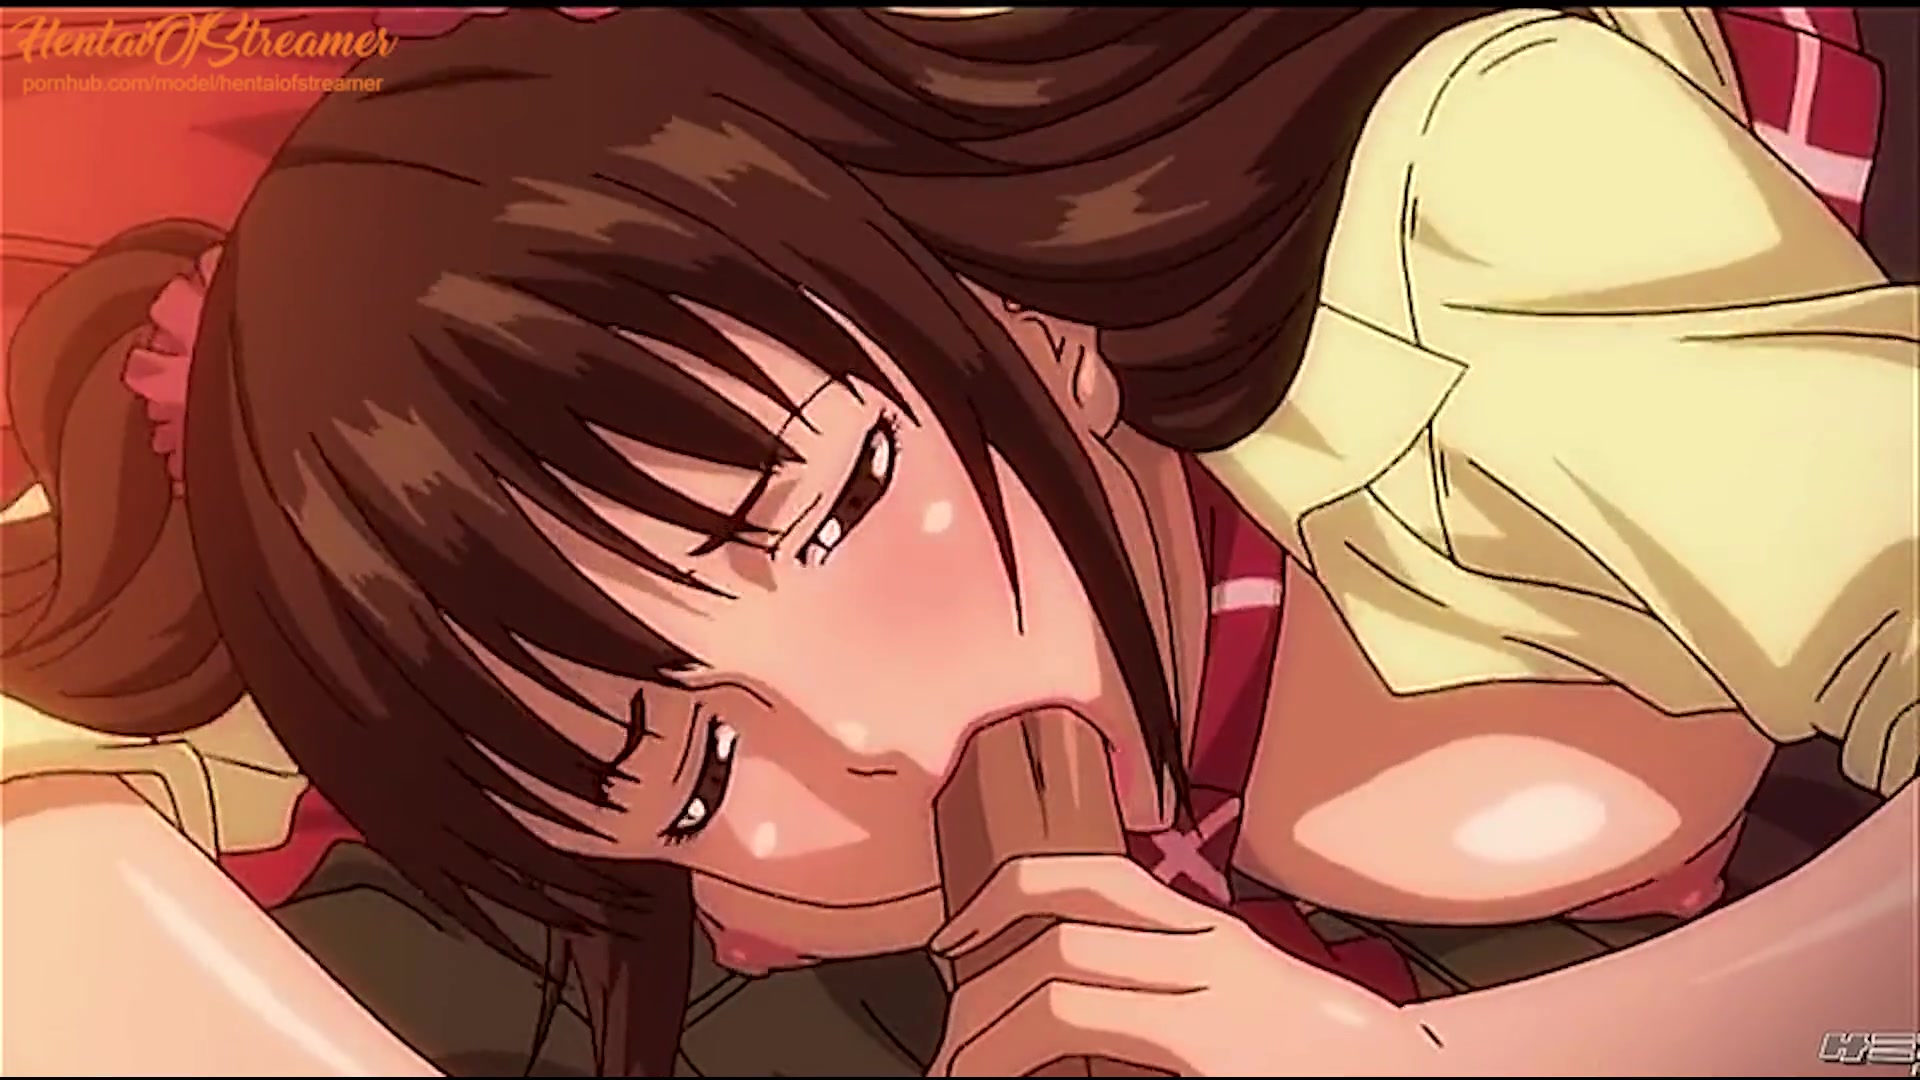 1920px x 1080px - Anime Porn Uncensored | Hotwife Dude Sees his Gf Plumb and Deep-Throat off  another Stud | Anime Porn, Anime - uiPorn.com